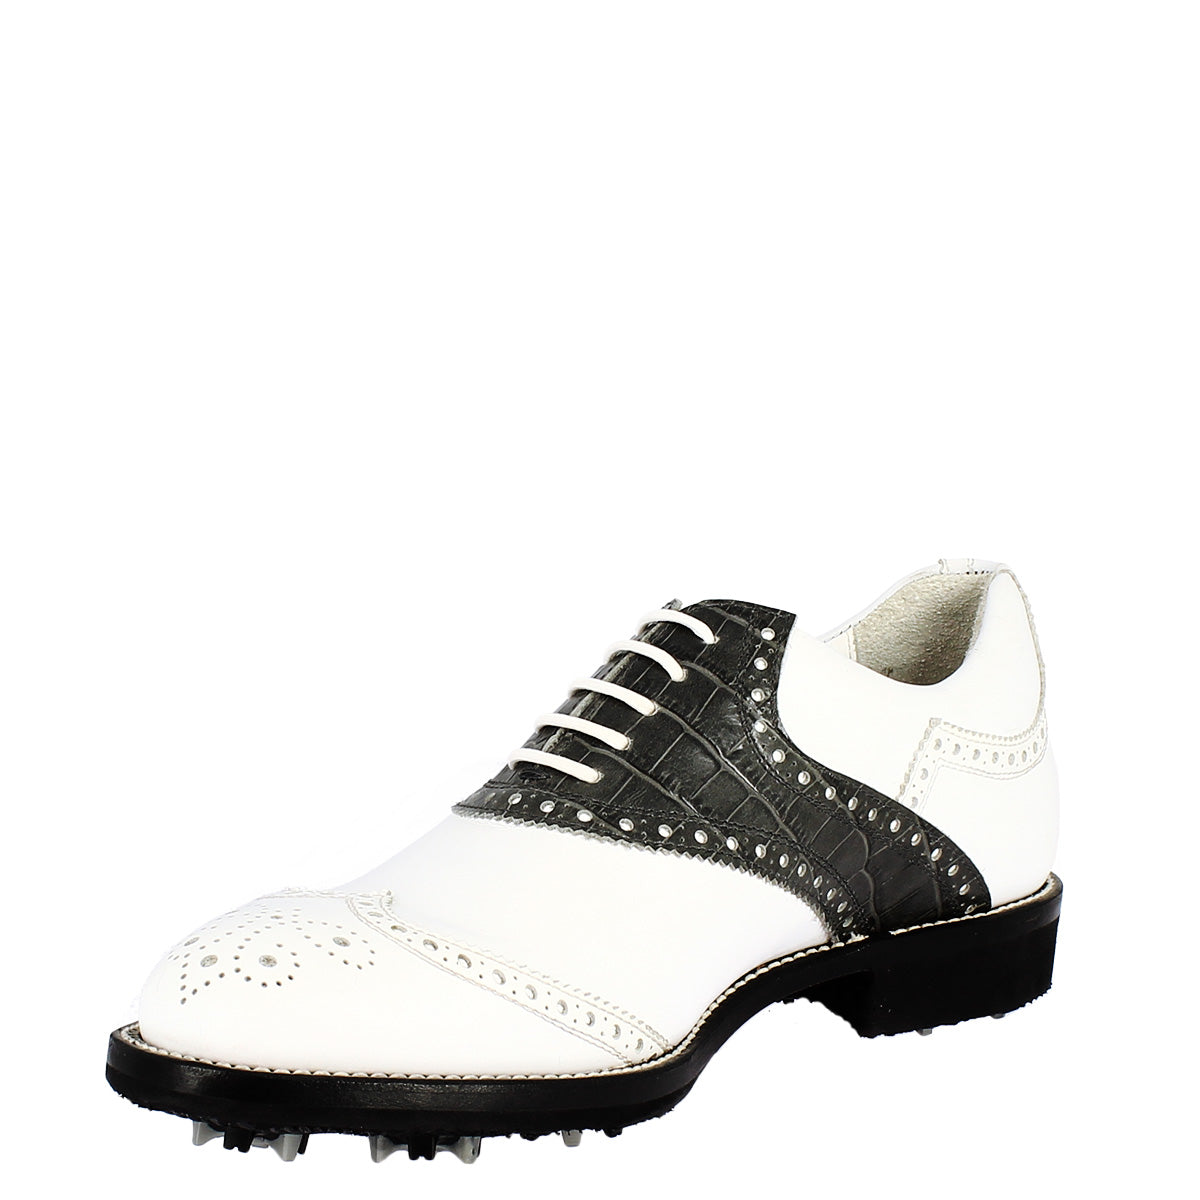 Handcrafted women's golf shoes in black white full-grain leather